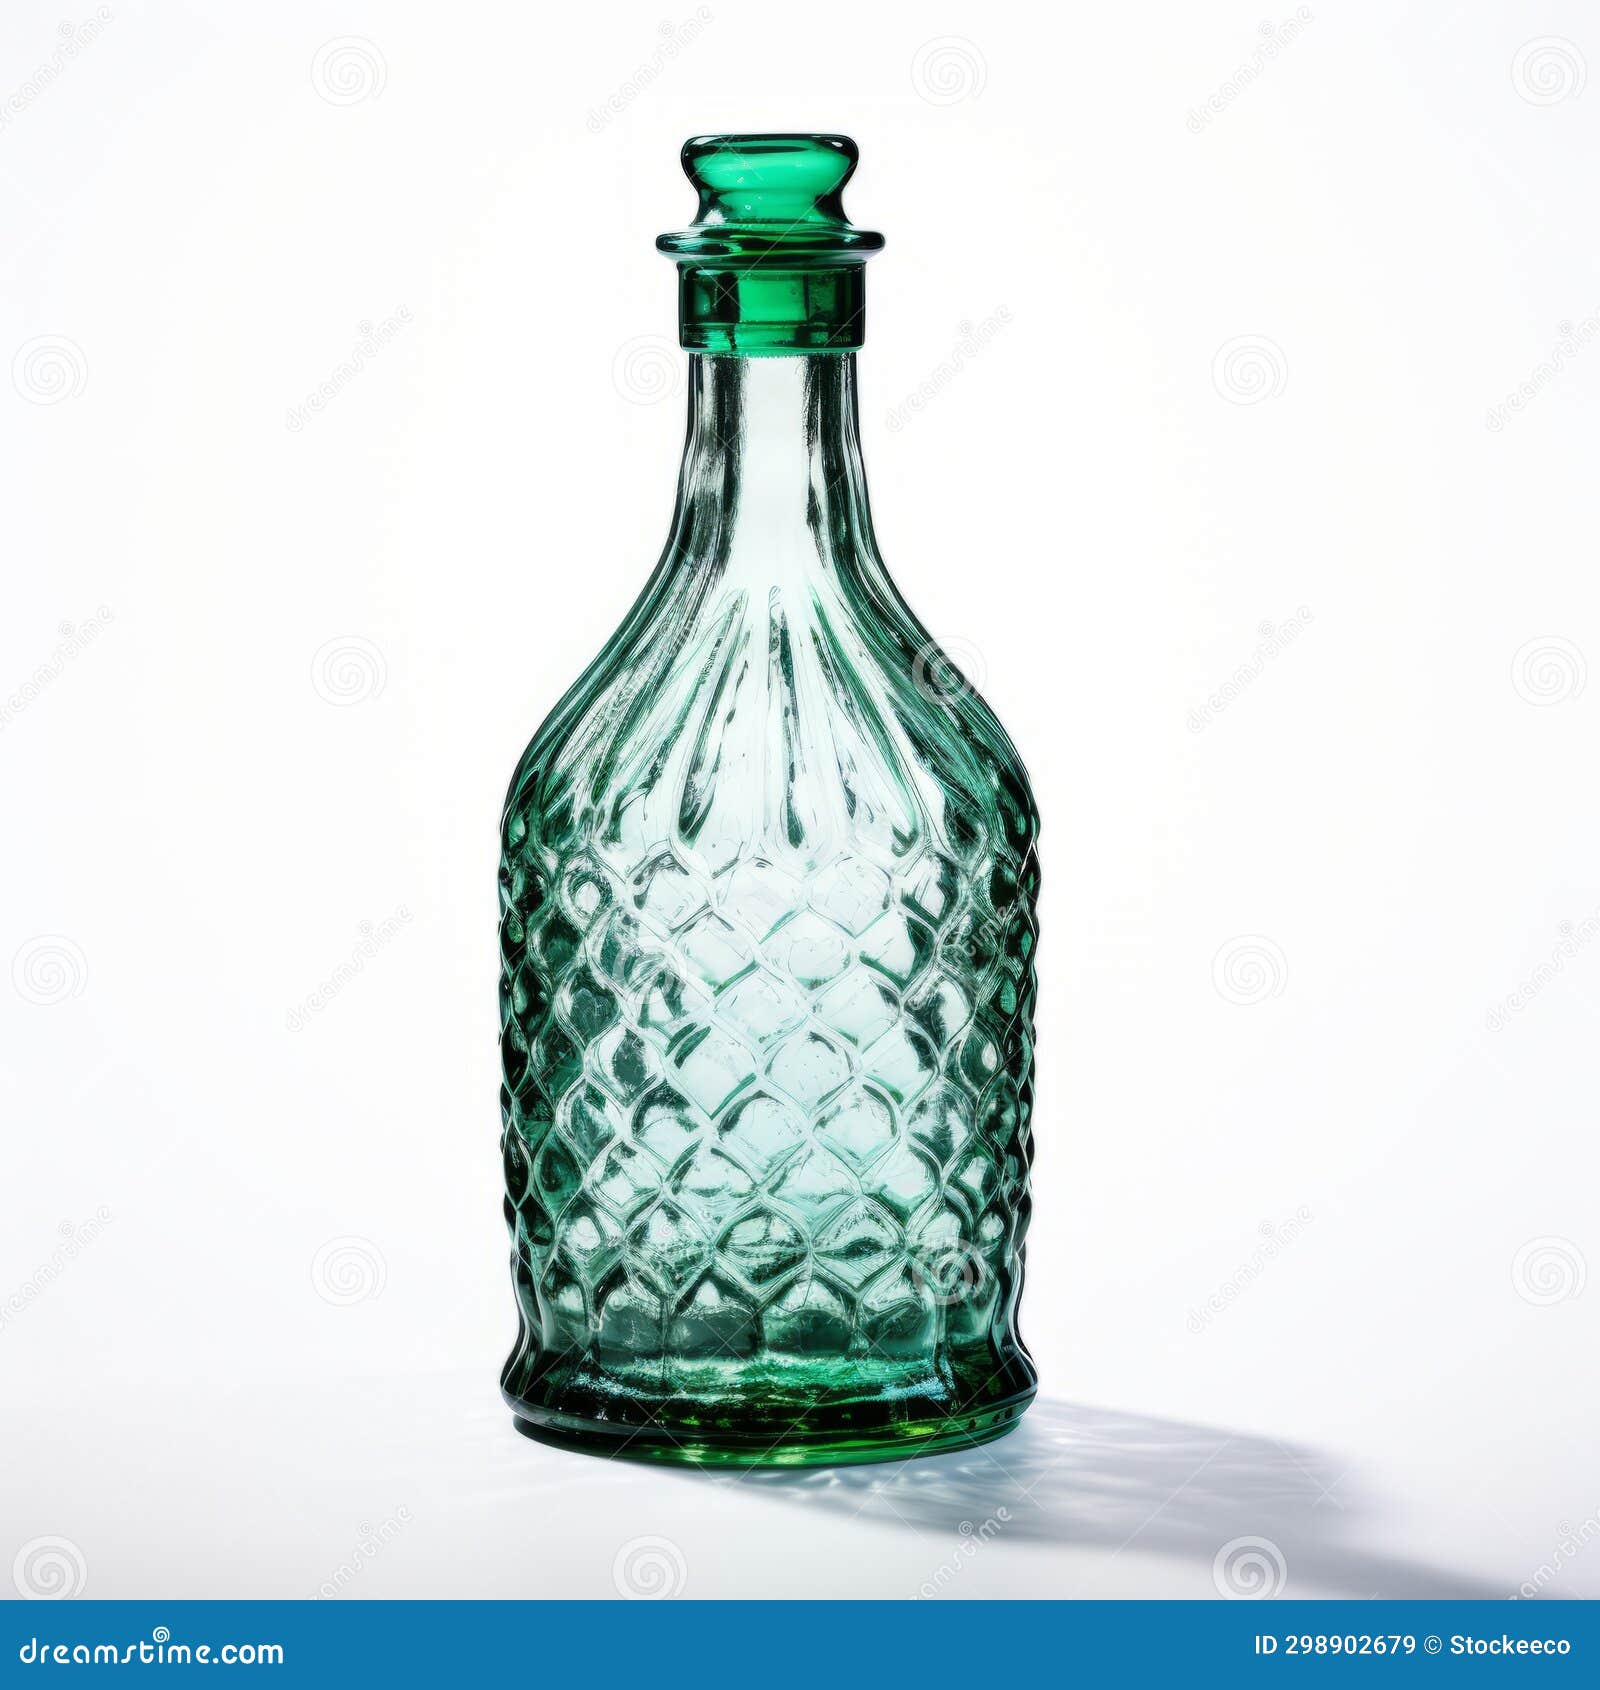 faceted green bottle with glass lid - barroco style